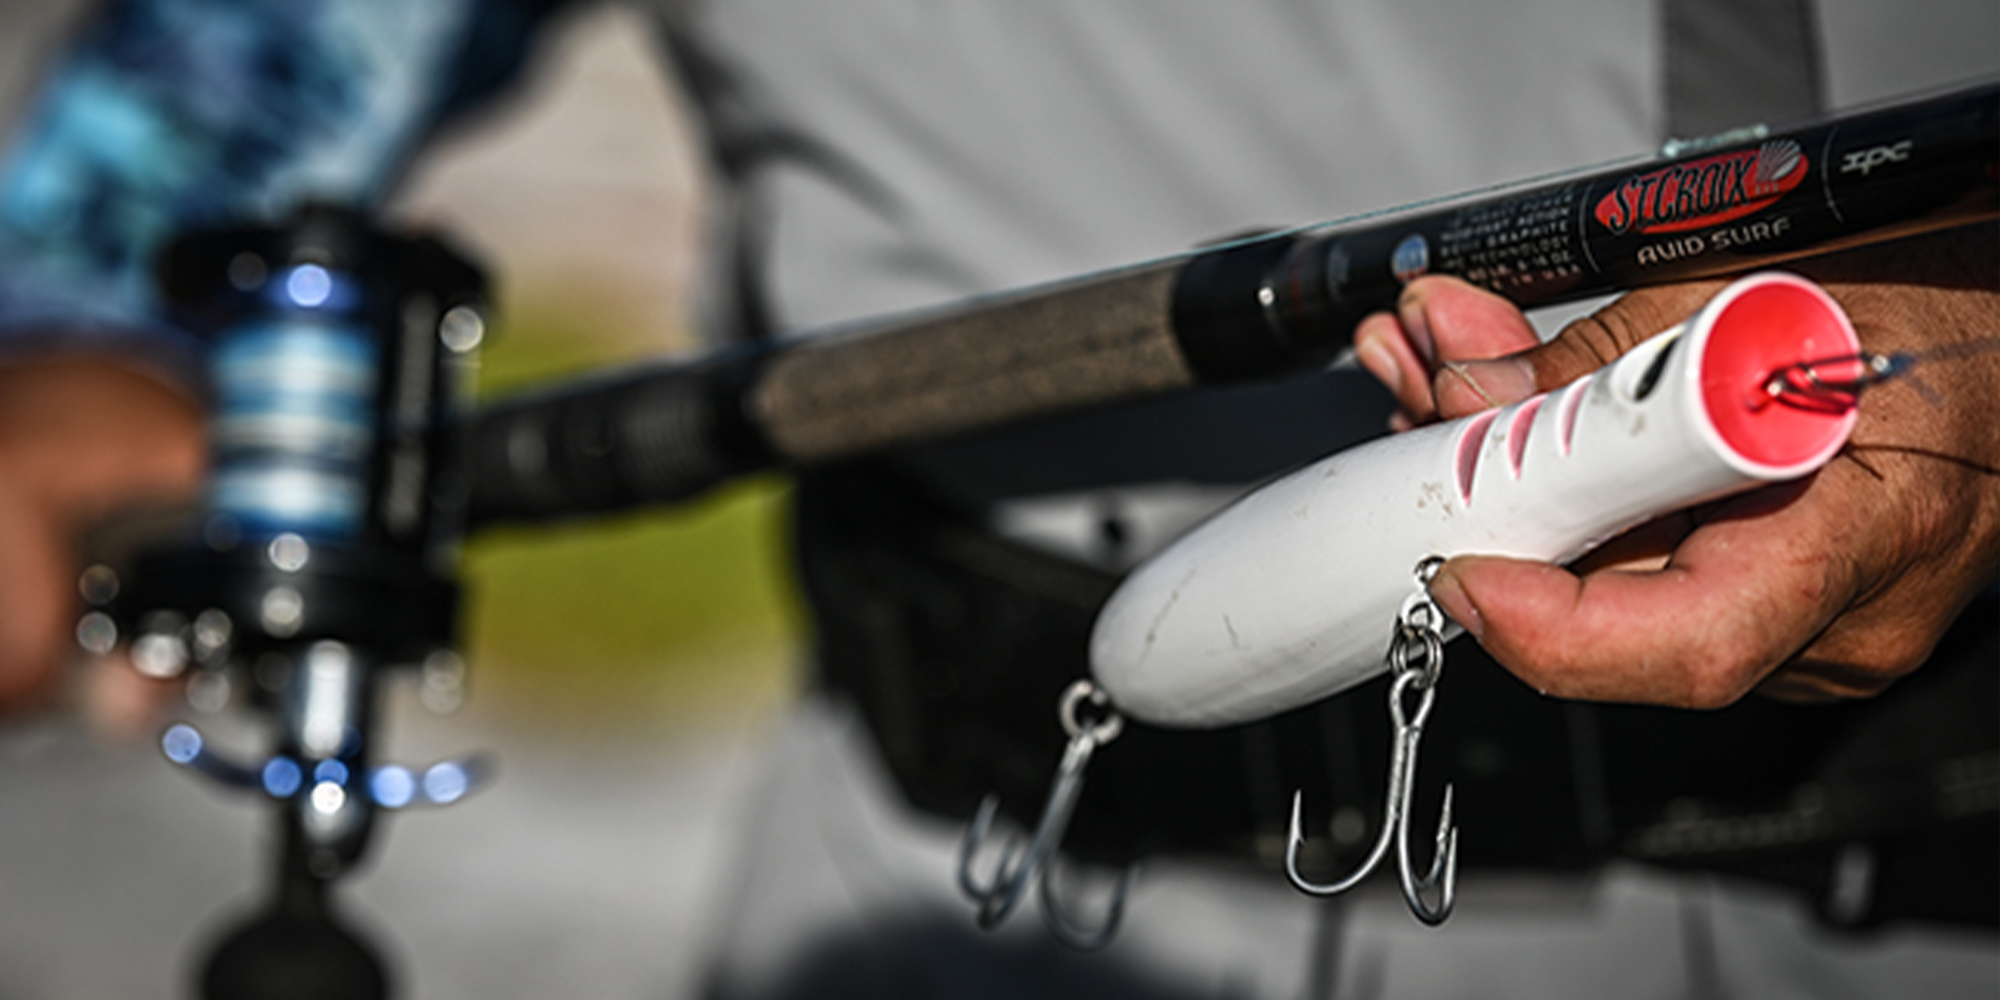 St. Croix Showcases Diverse, New Rod Offerings at ICAST - Major